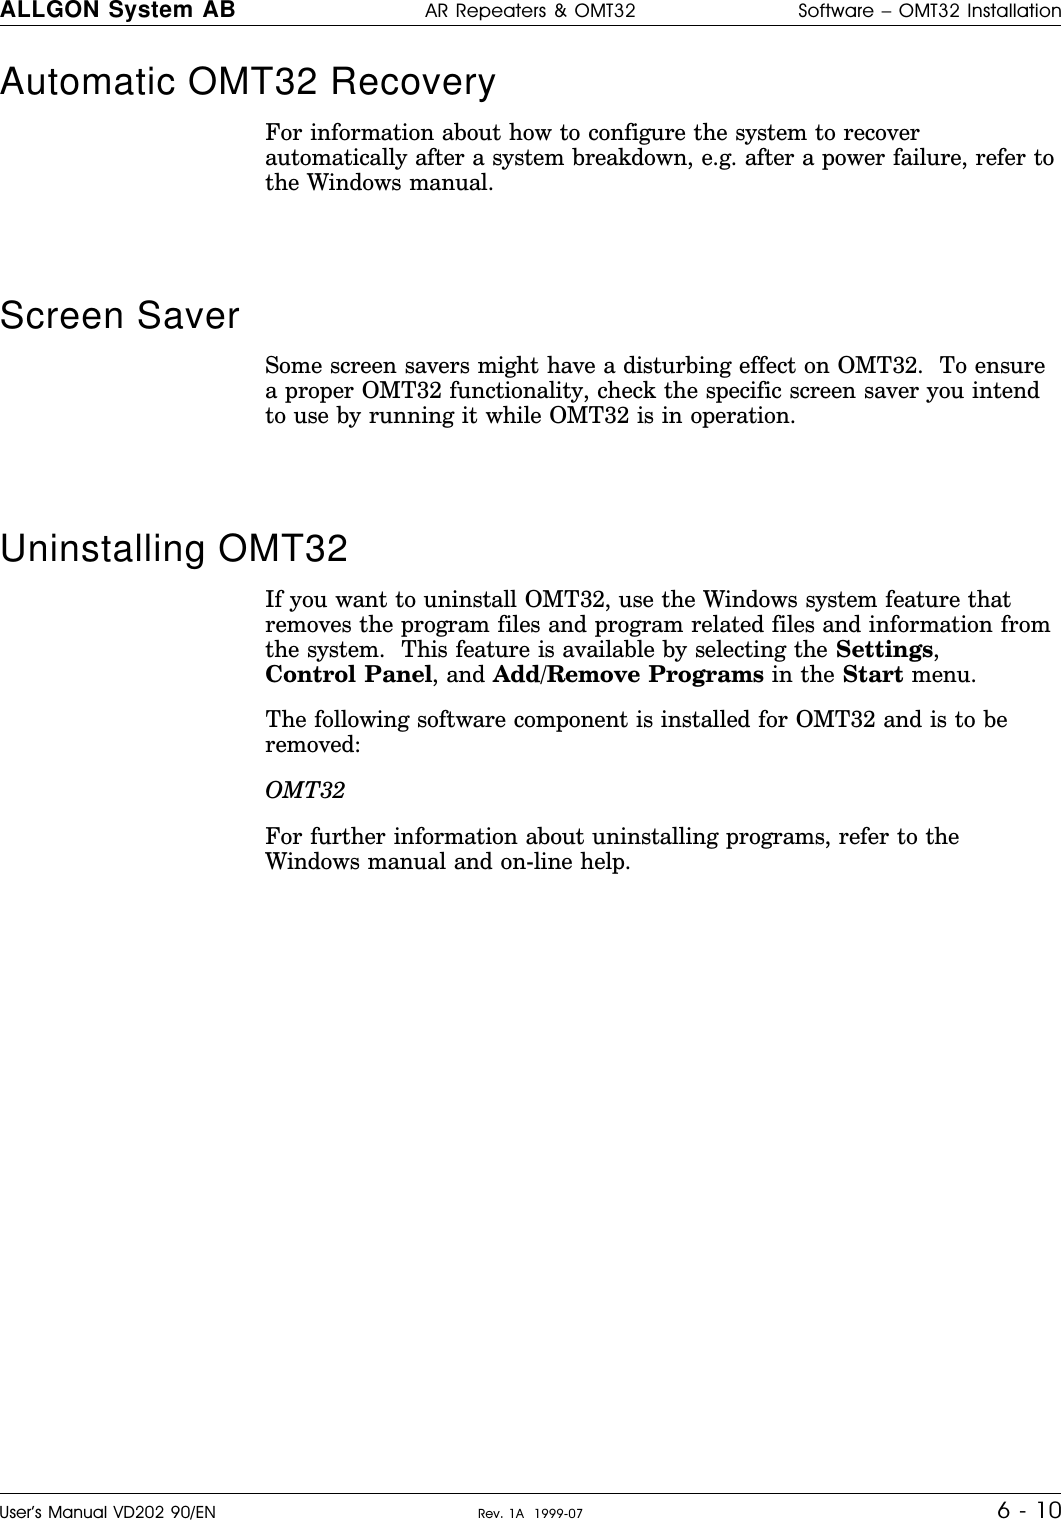 Automatic OMT32 RecoveryFor information about how to configure the system to recoverautomatically after a system breakdown, e.g. after a power failure, refer tothe Windows manual.Screen Saver Some screen savers might have a disturbing effect on OMT32.  To ensurea proper OMT32 functionality, check the specific screen saver you intendto use by running it while OMT32 is in operation.Uninstalling OMT32 If you want to uninstall OMT32, use the Windows system feature thatremoves the program files and program related files and information fromthe system.  This feature is available by selecting the Settings,Control Panel, and Add/Remove Programs in the Start menu.The following software component is installed for OMT32 and is to beremoved:OMT32For further information about uninstalling programs, refer to theWindows manual and on-line help.ALLGON System AB AR Repeaters &amp; OMT32 Software – OMT32 InstallationUser’s Manual VD202 90/EN Rev. 1A  1999-07 6 - 10